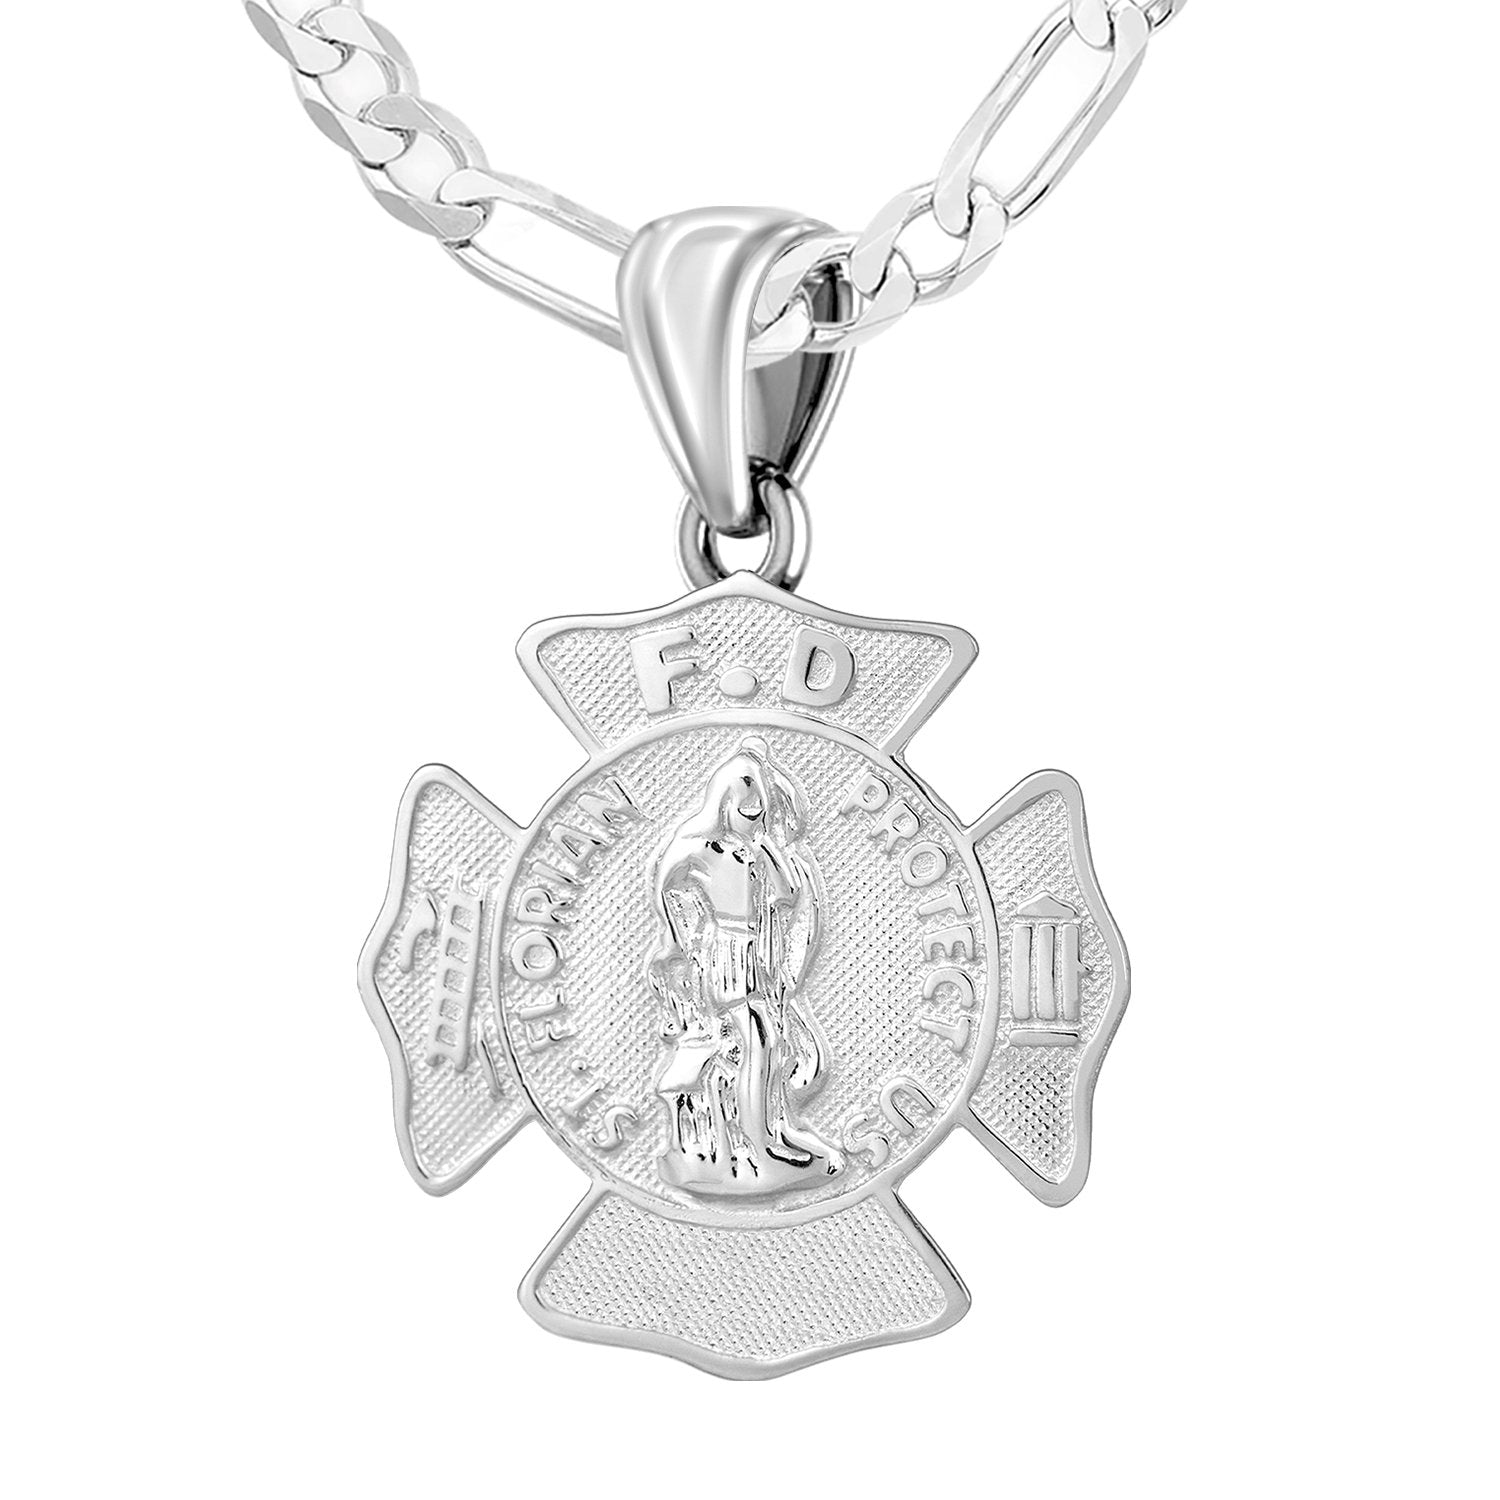 Firefighter Pendant In 925 Silver - 3mm Figaro Chain